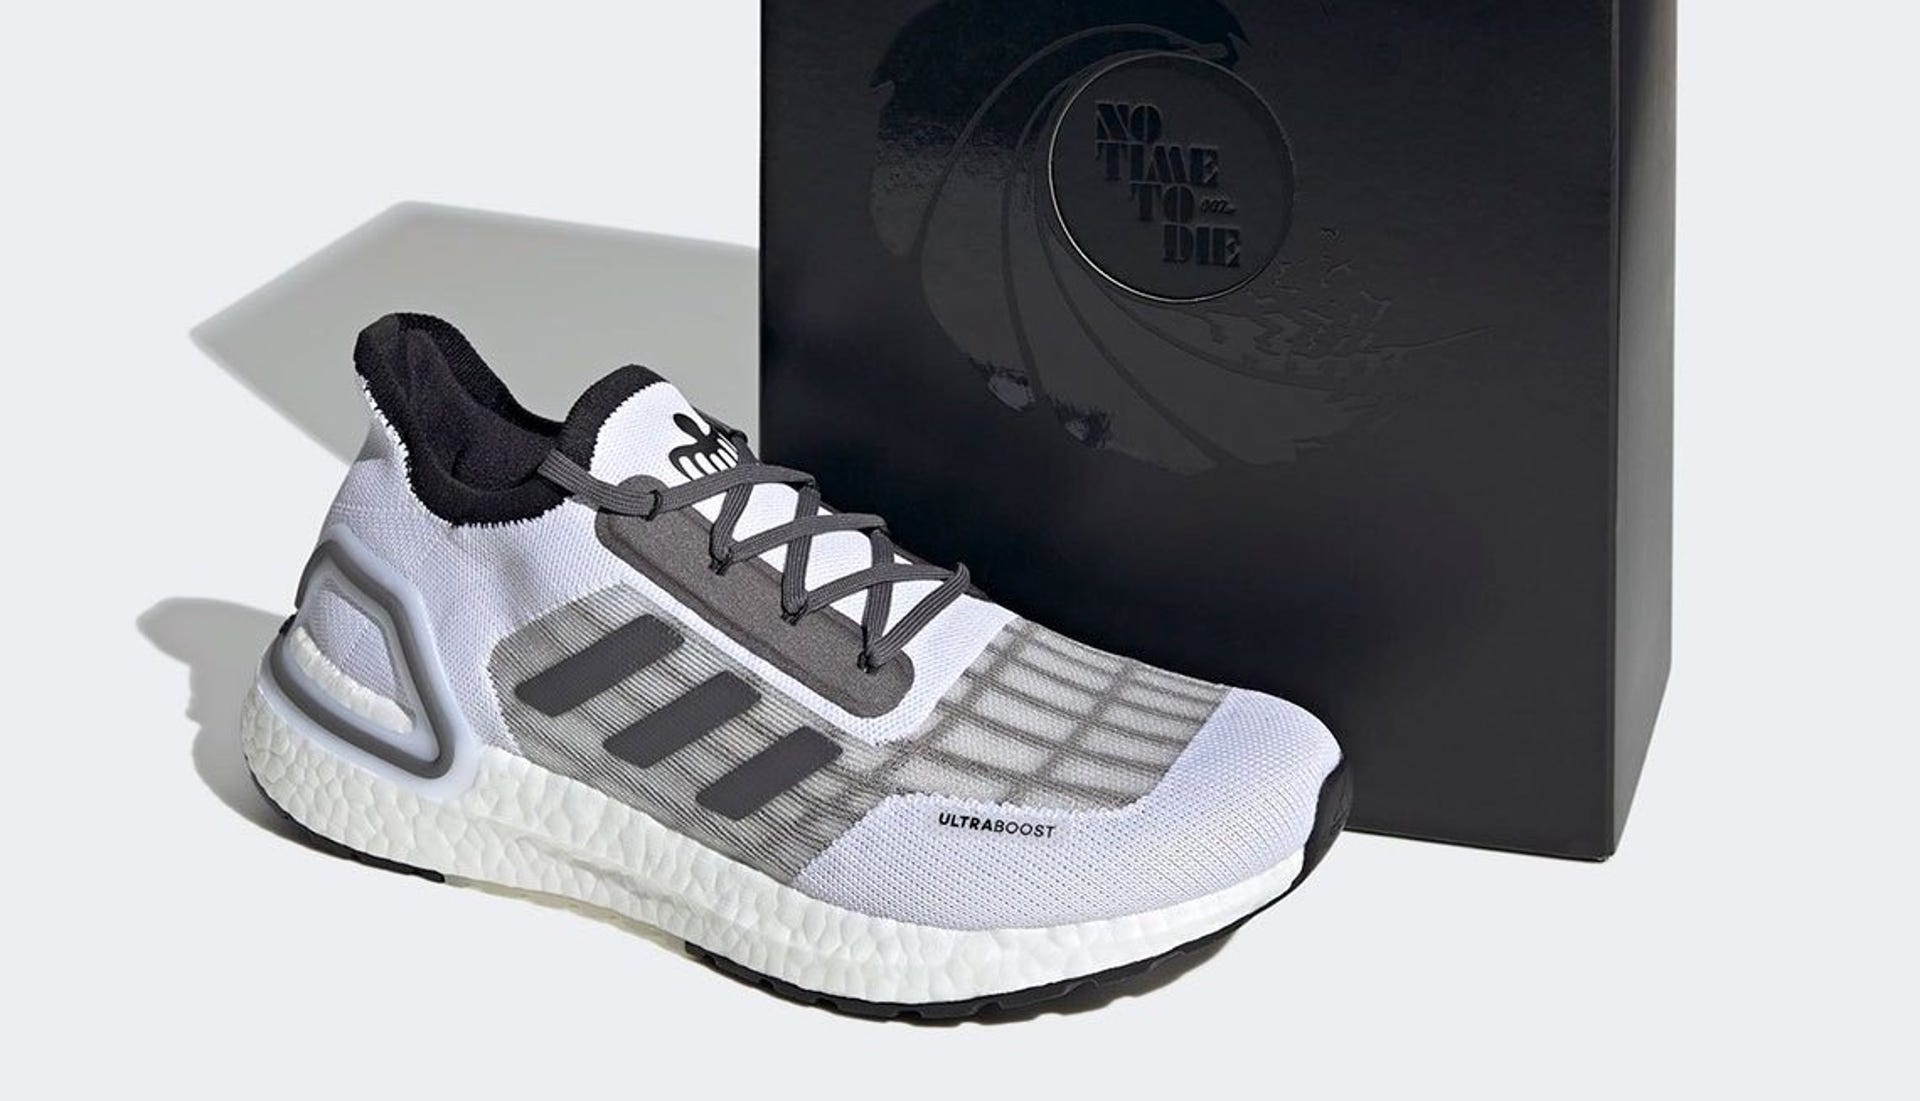 James Bond Adidas sneakers into action with Time to Die -